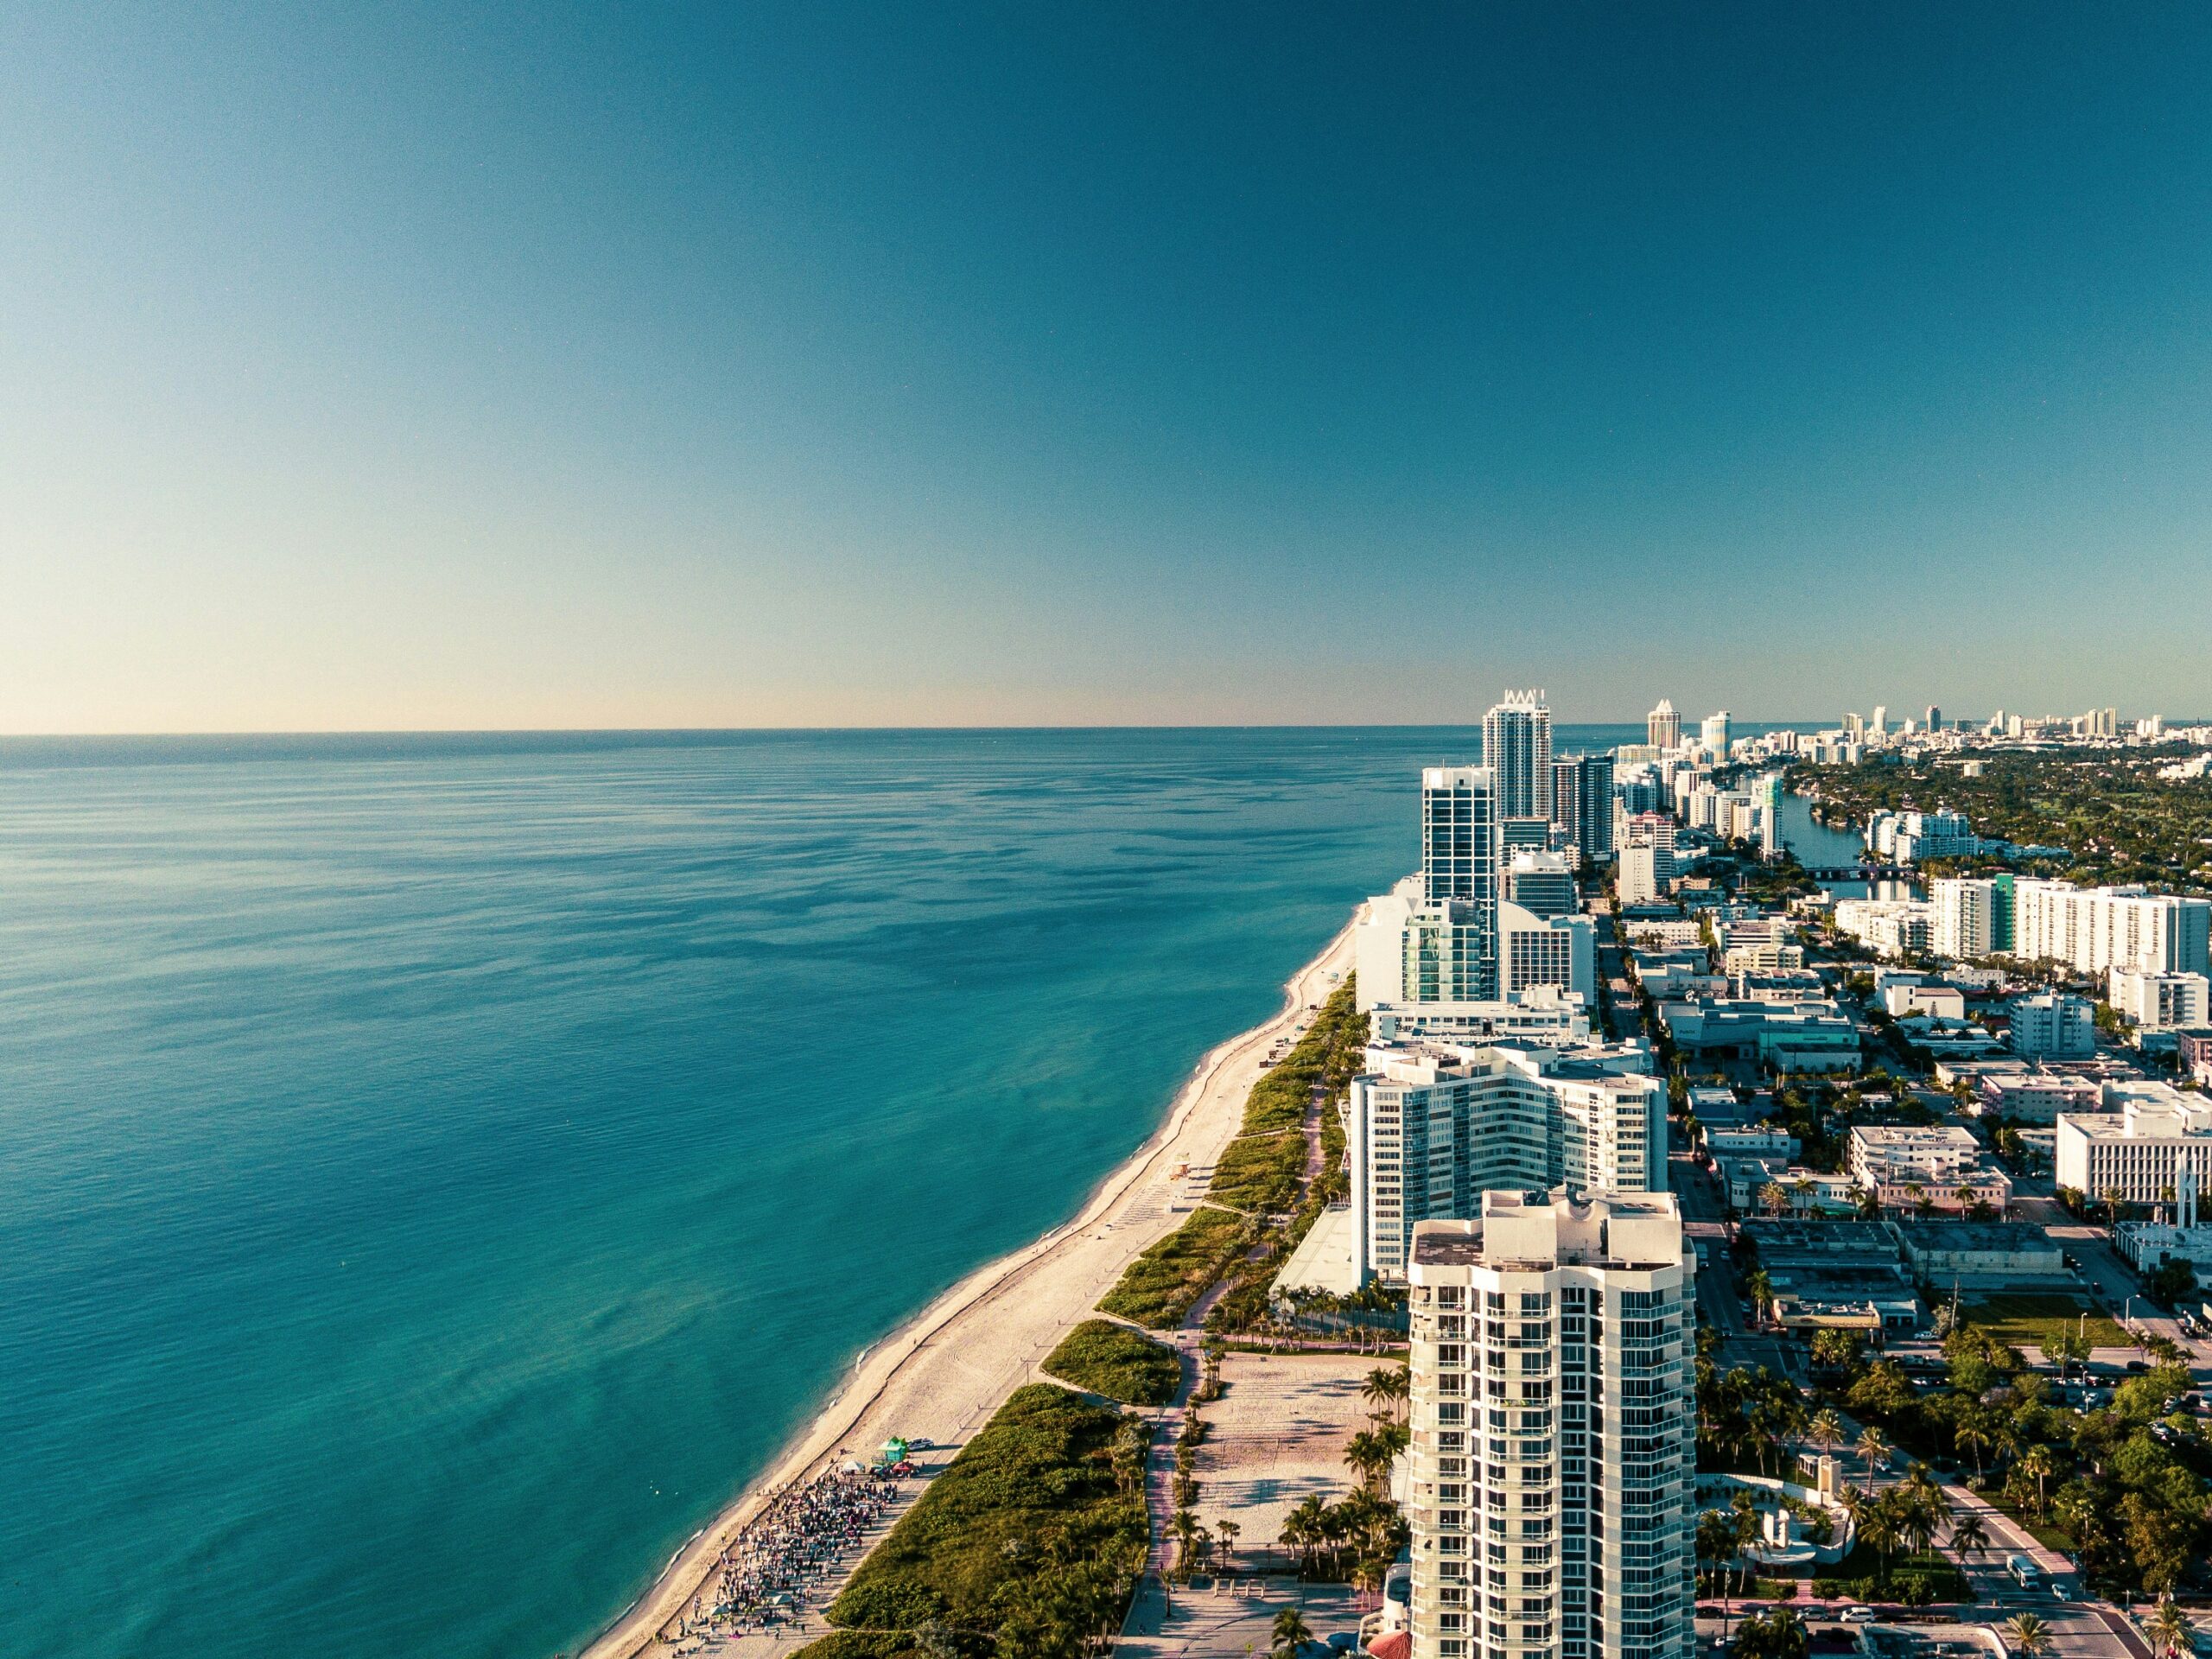 Miami is one of the best places to live in Florida for nightlife and entertainment. Pictured: Miami Beach